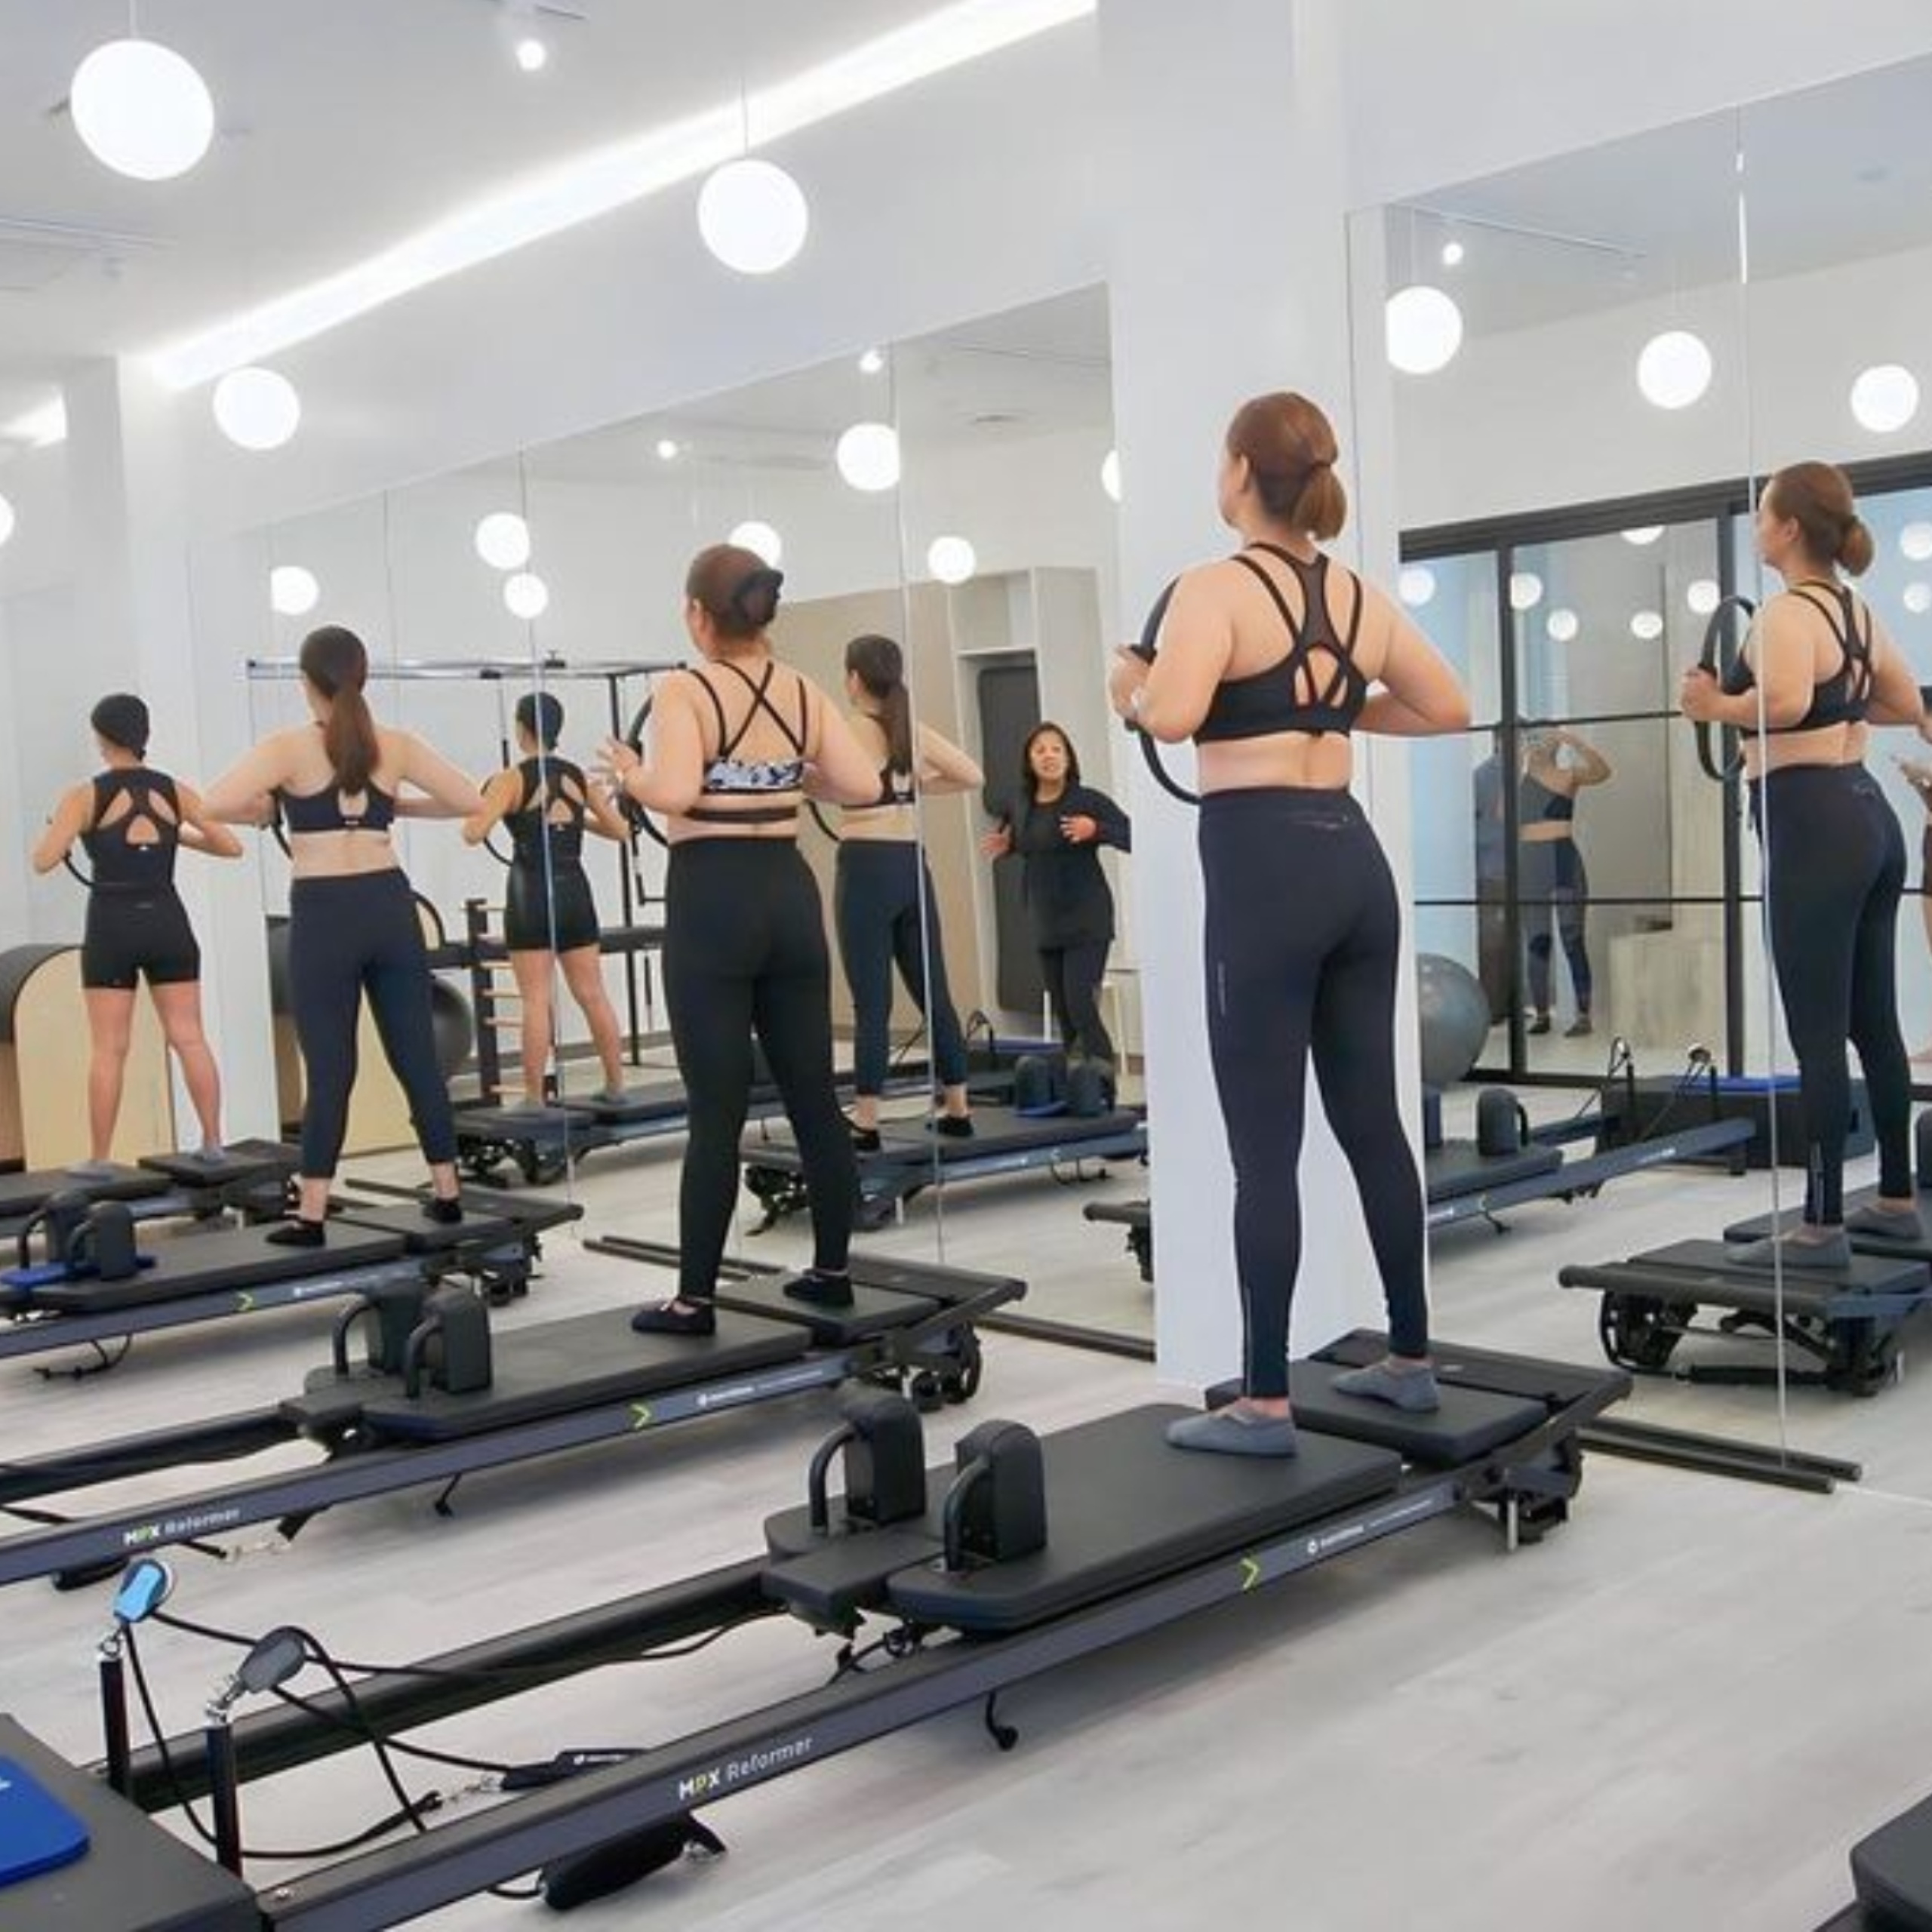 7 Fitness Classes You Need on Your Radar to Burn Calories